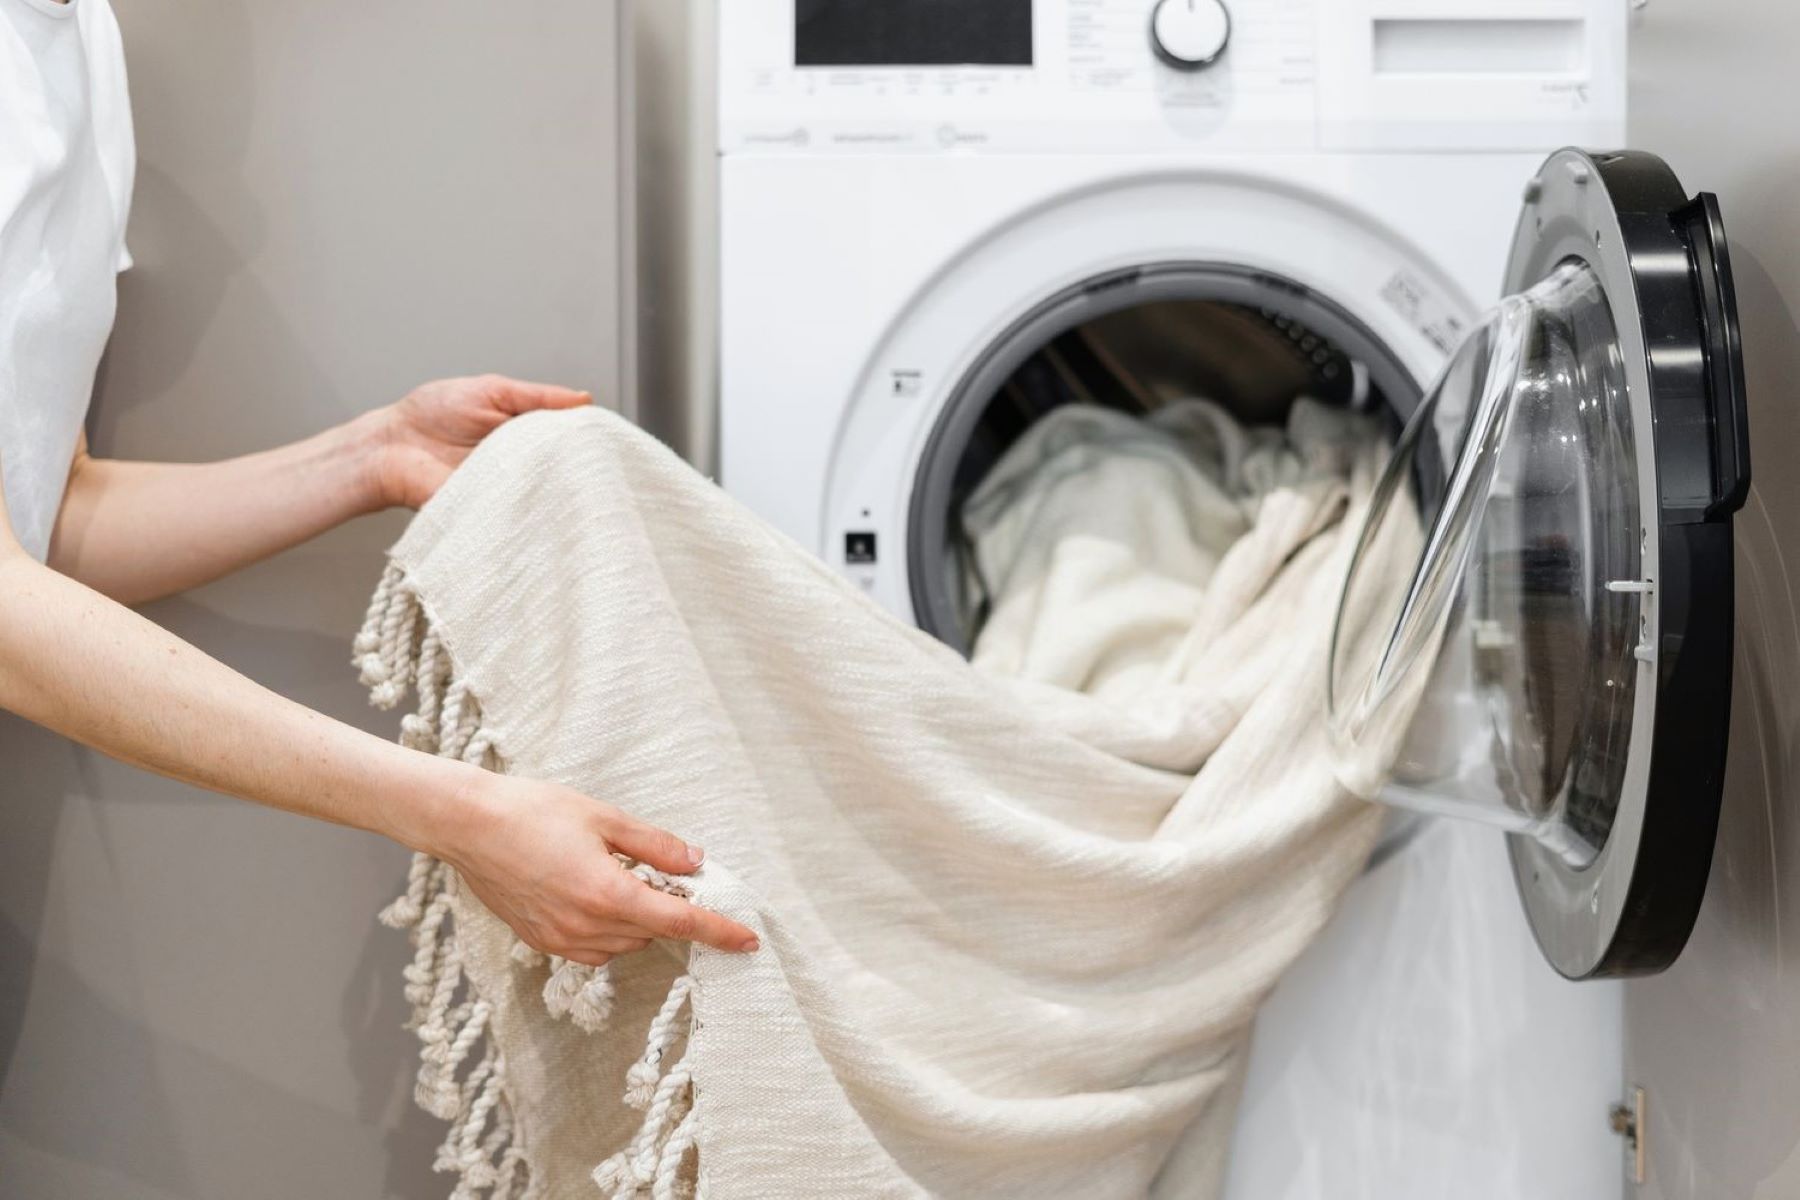 How To Wash White Clothes In A Washing Machine With Bleach